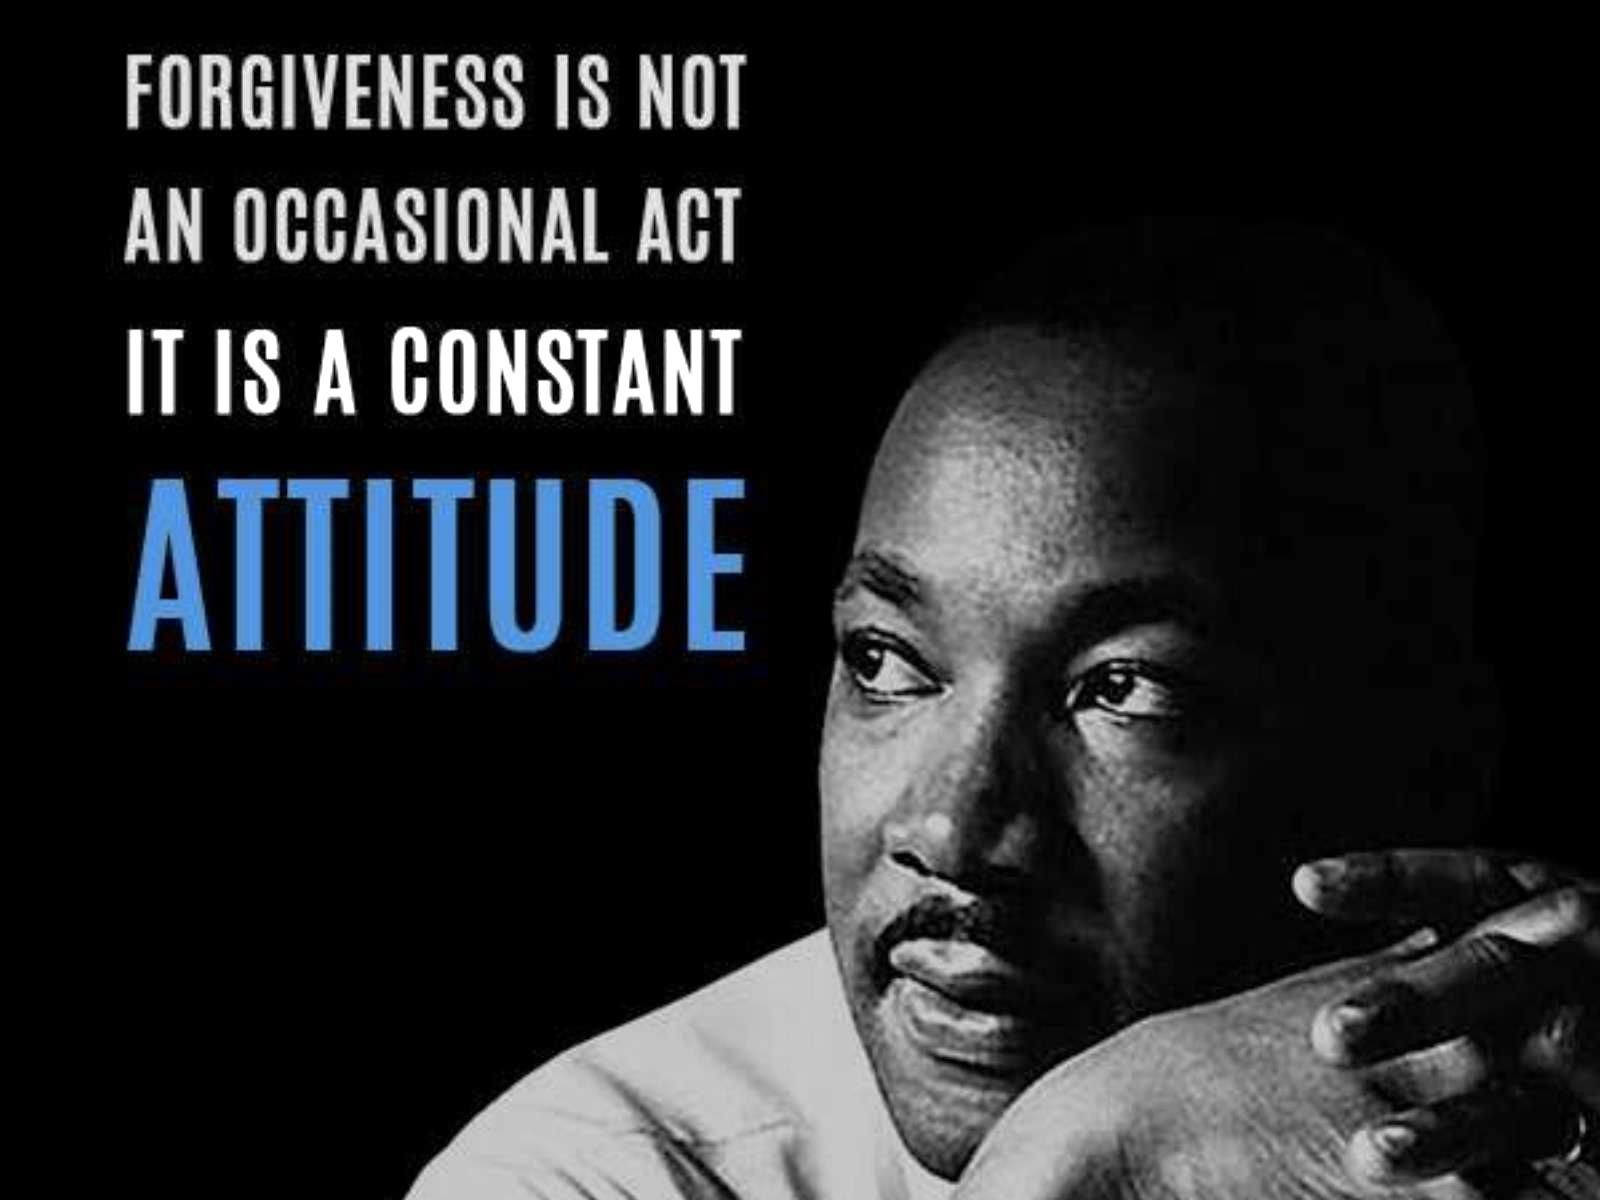 Martin Luther King Jr Quotes About Education
 mlk quote education Google Search